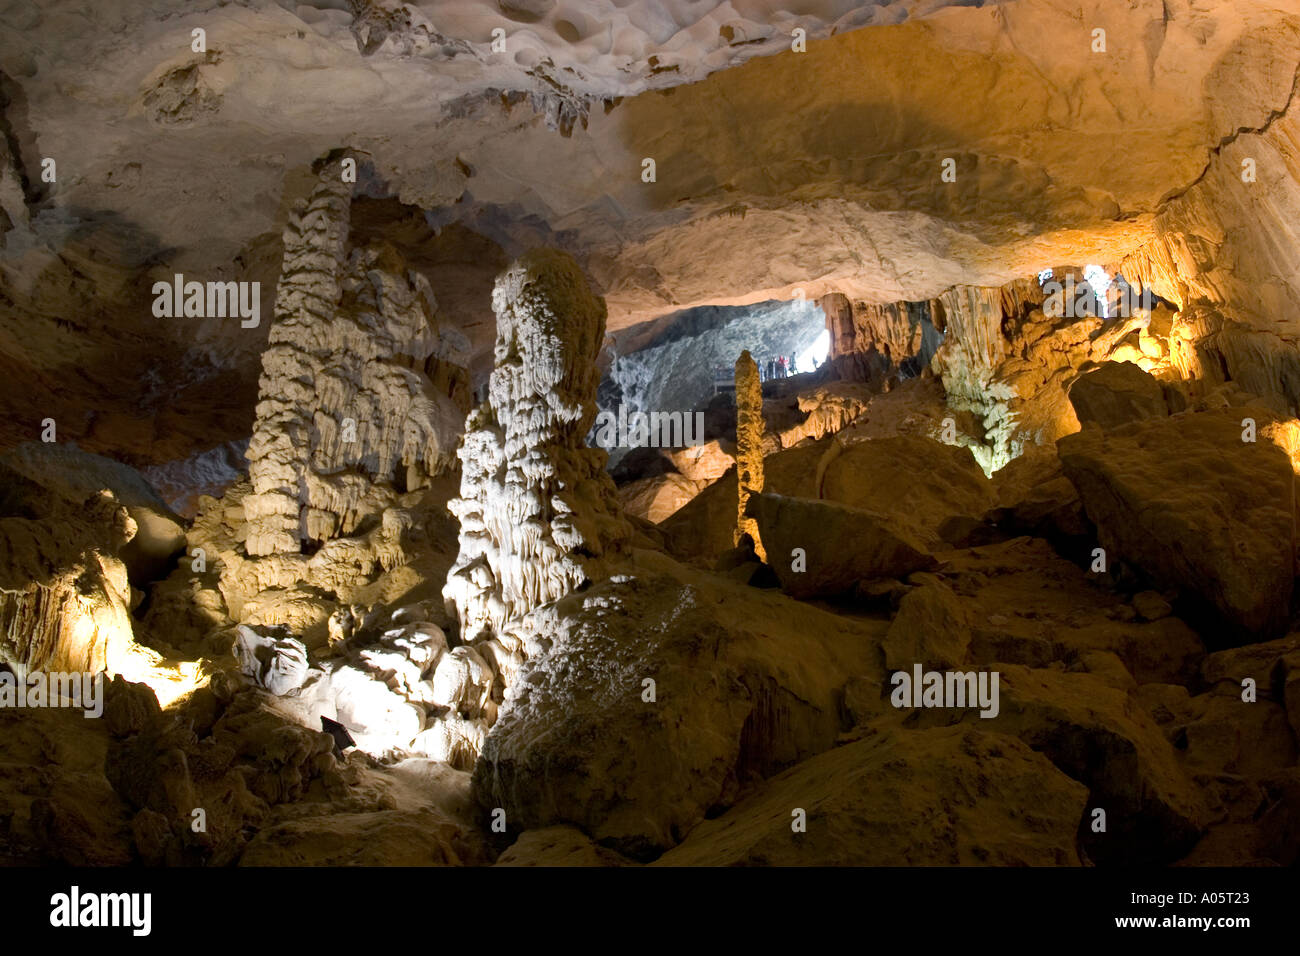 Vietnam northeast Halong Bay Hang Sung Sot cave illuminated underground stalactites and stalagmites near mouth of cave Stock Photo